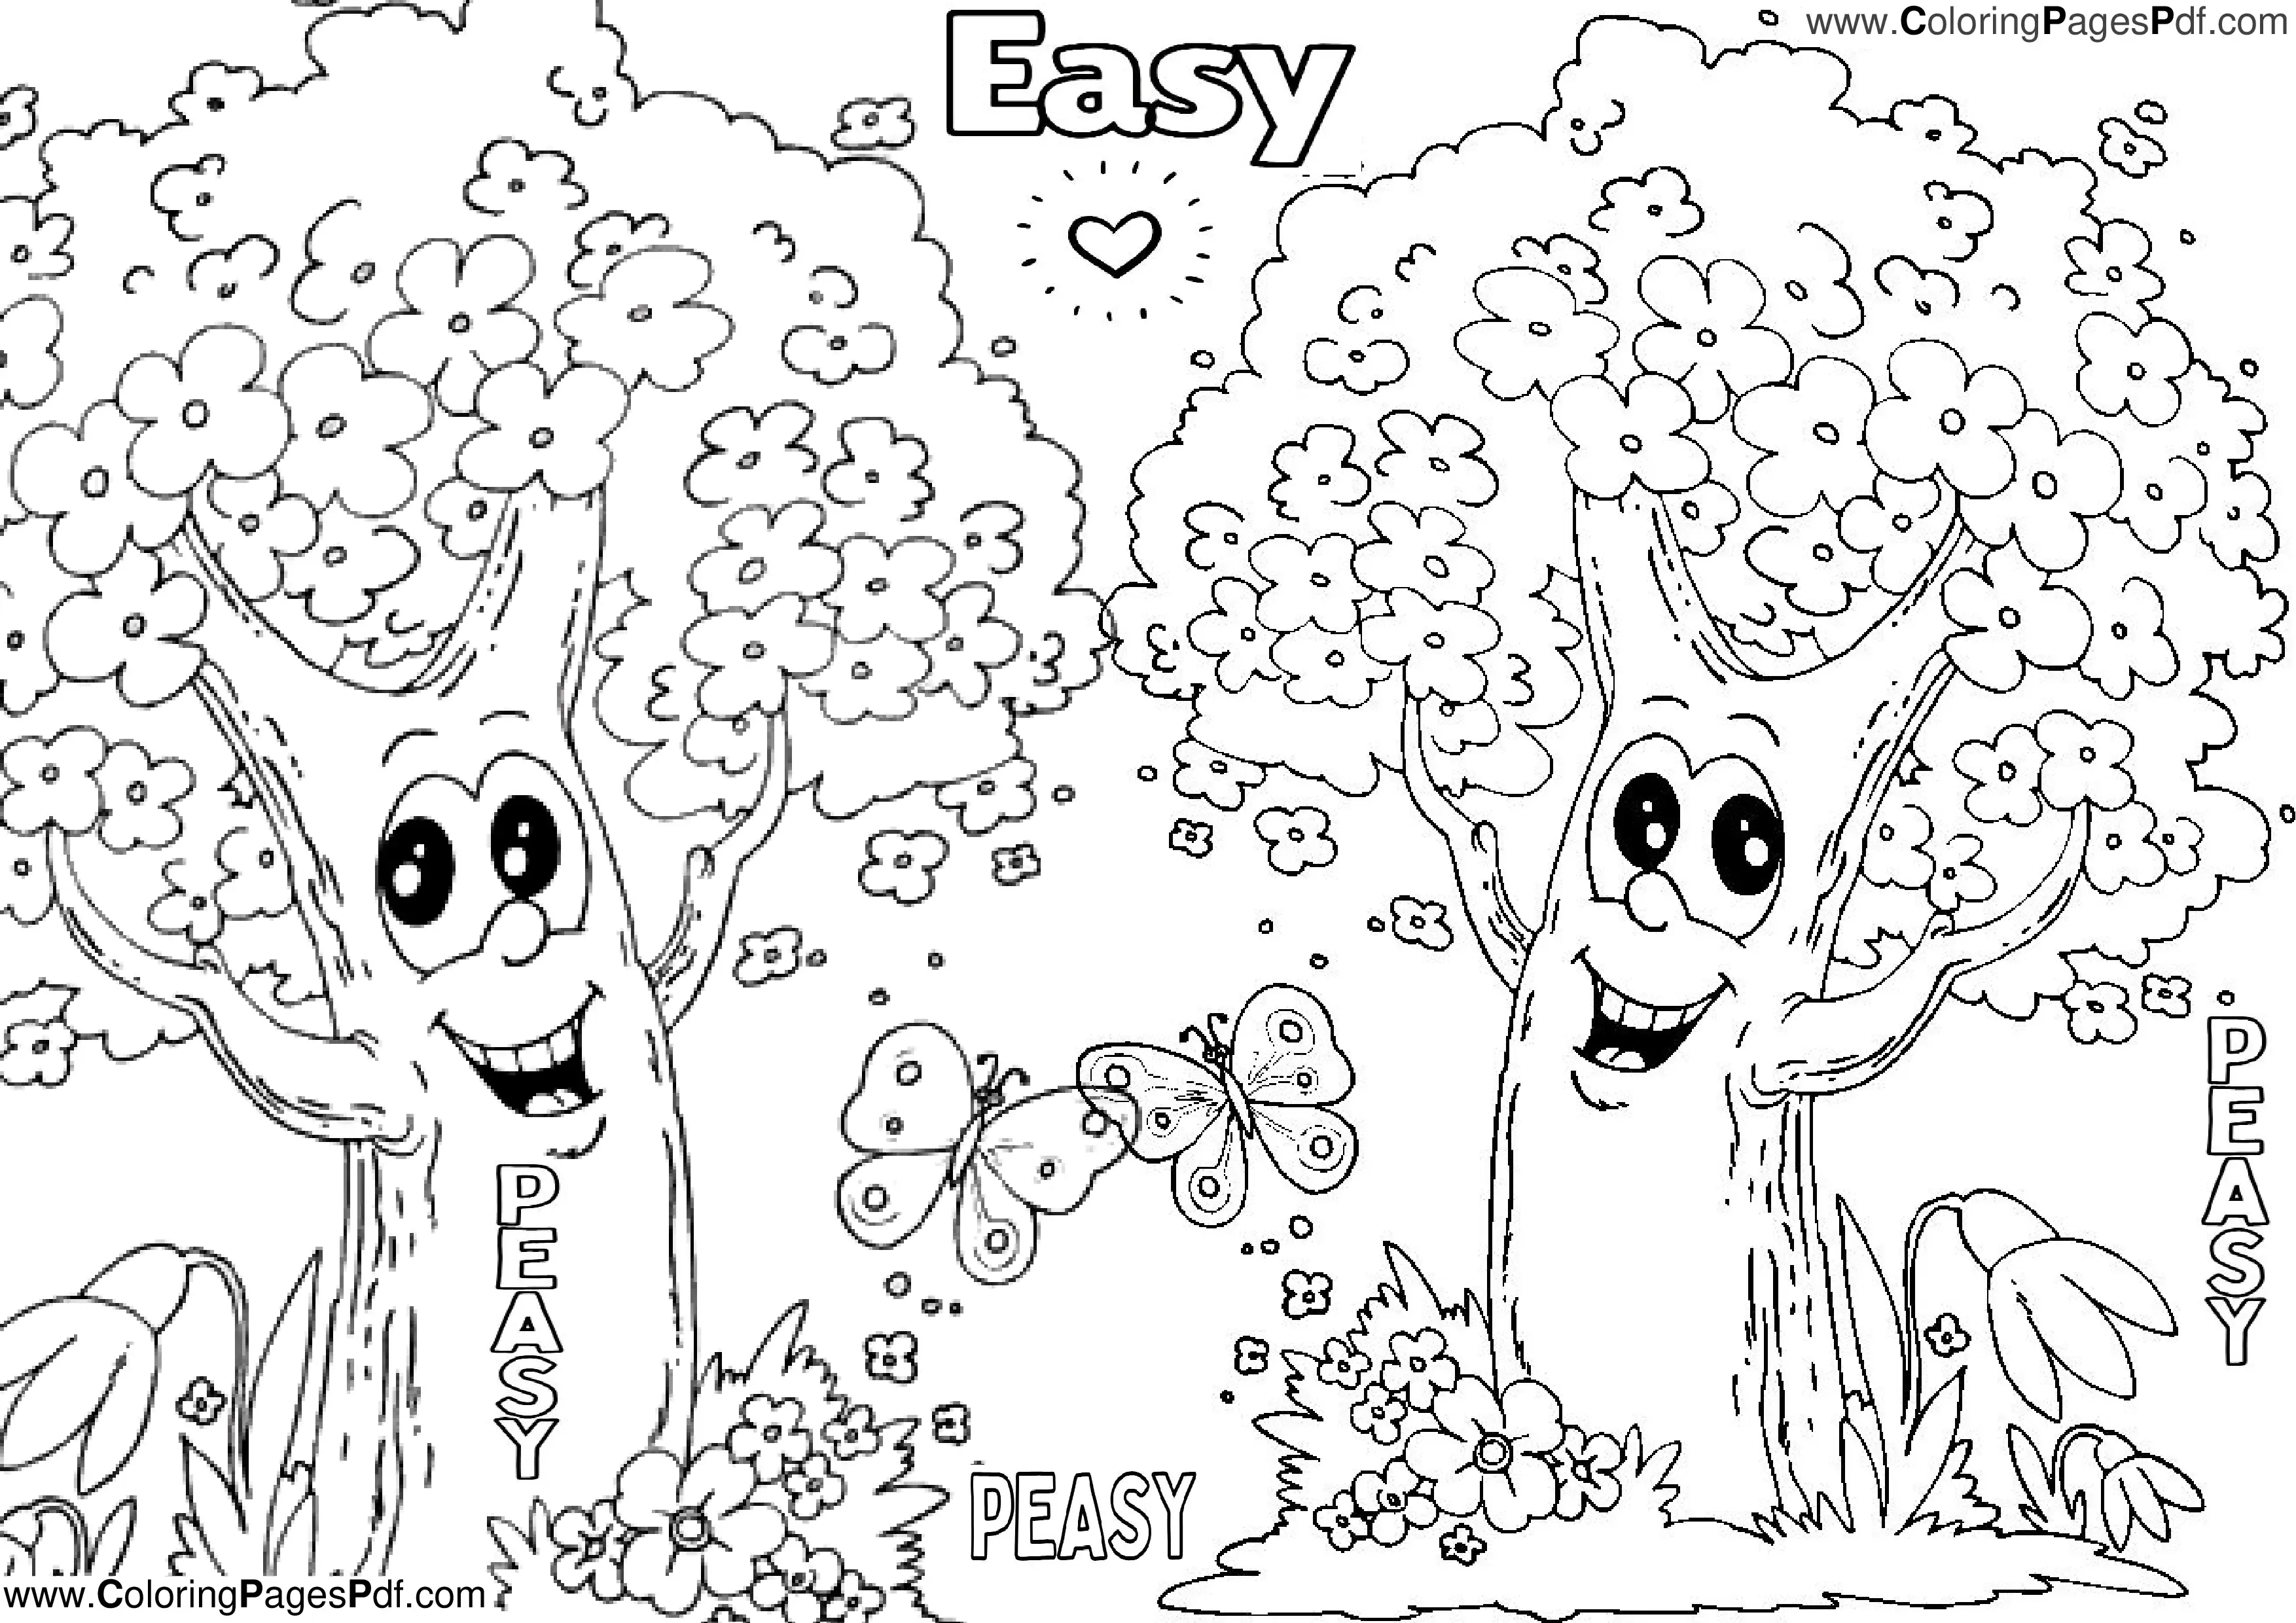 Tree coloring pages for kids